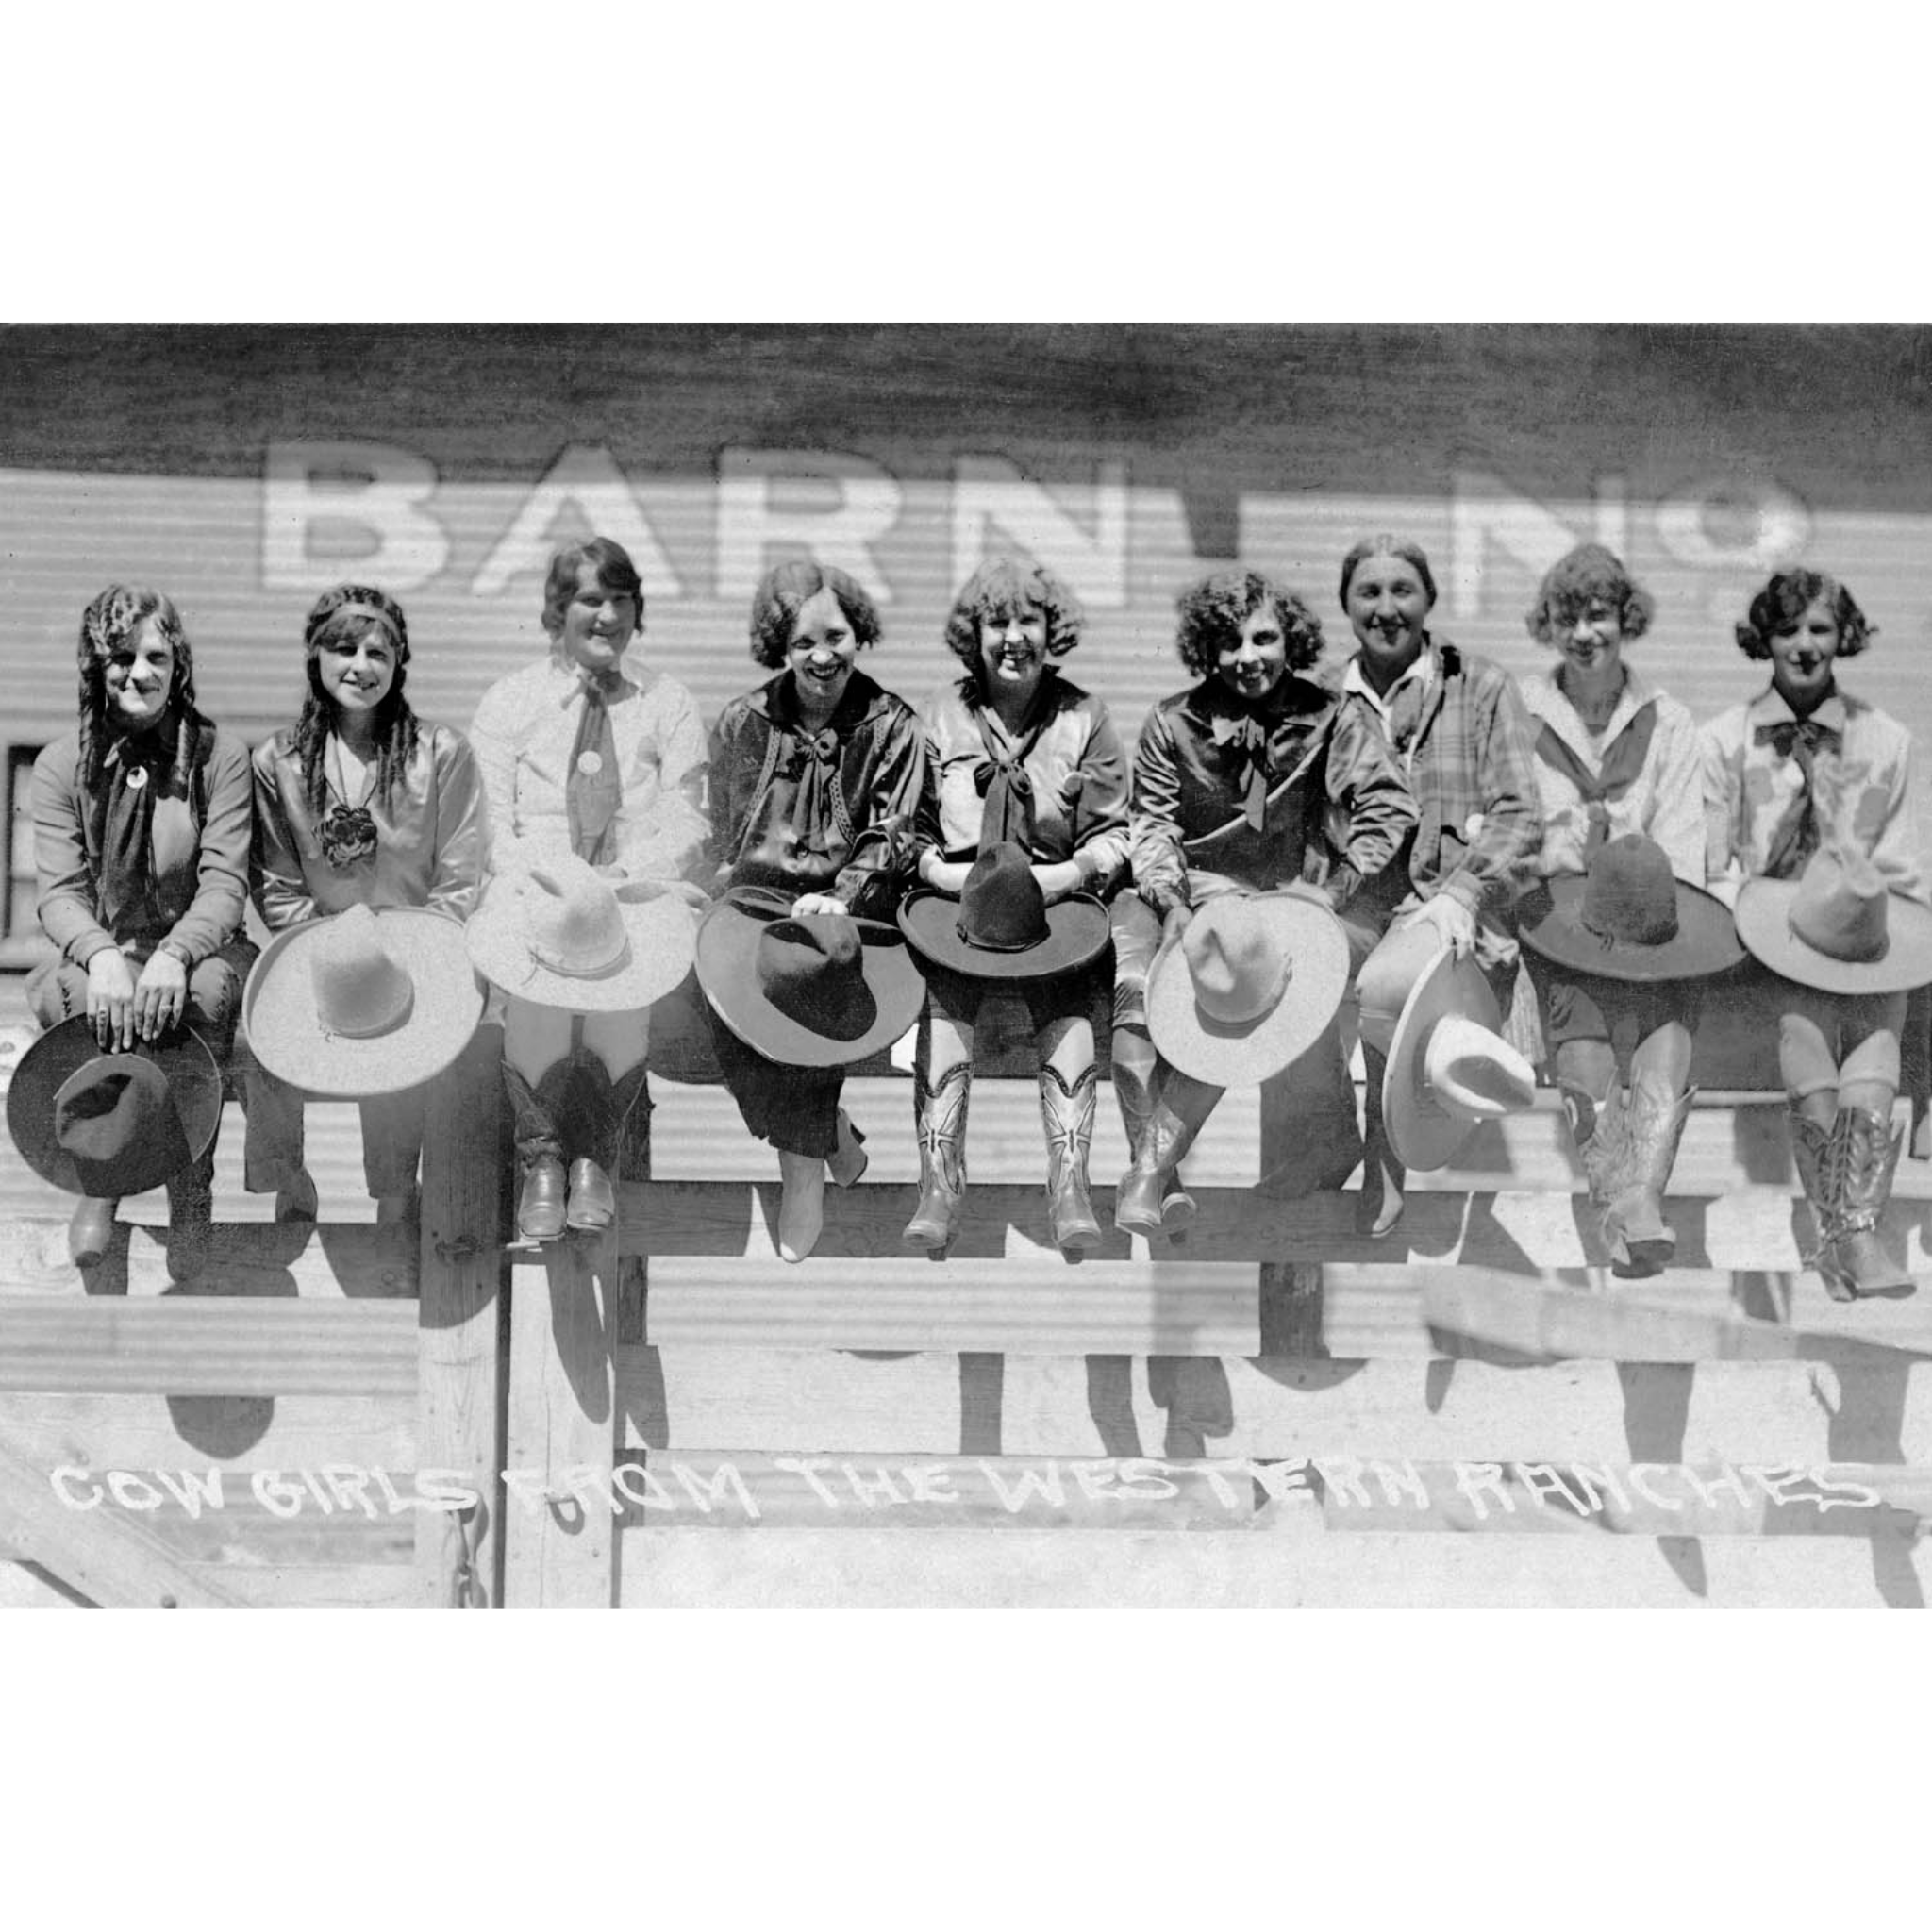 Cowgirls from the Western Ranches (sitting on fence) - Doubleday - ca. 1925 Photograph